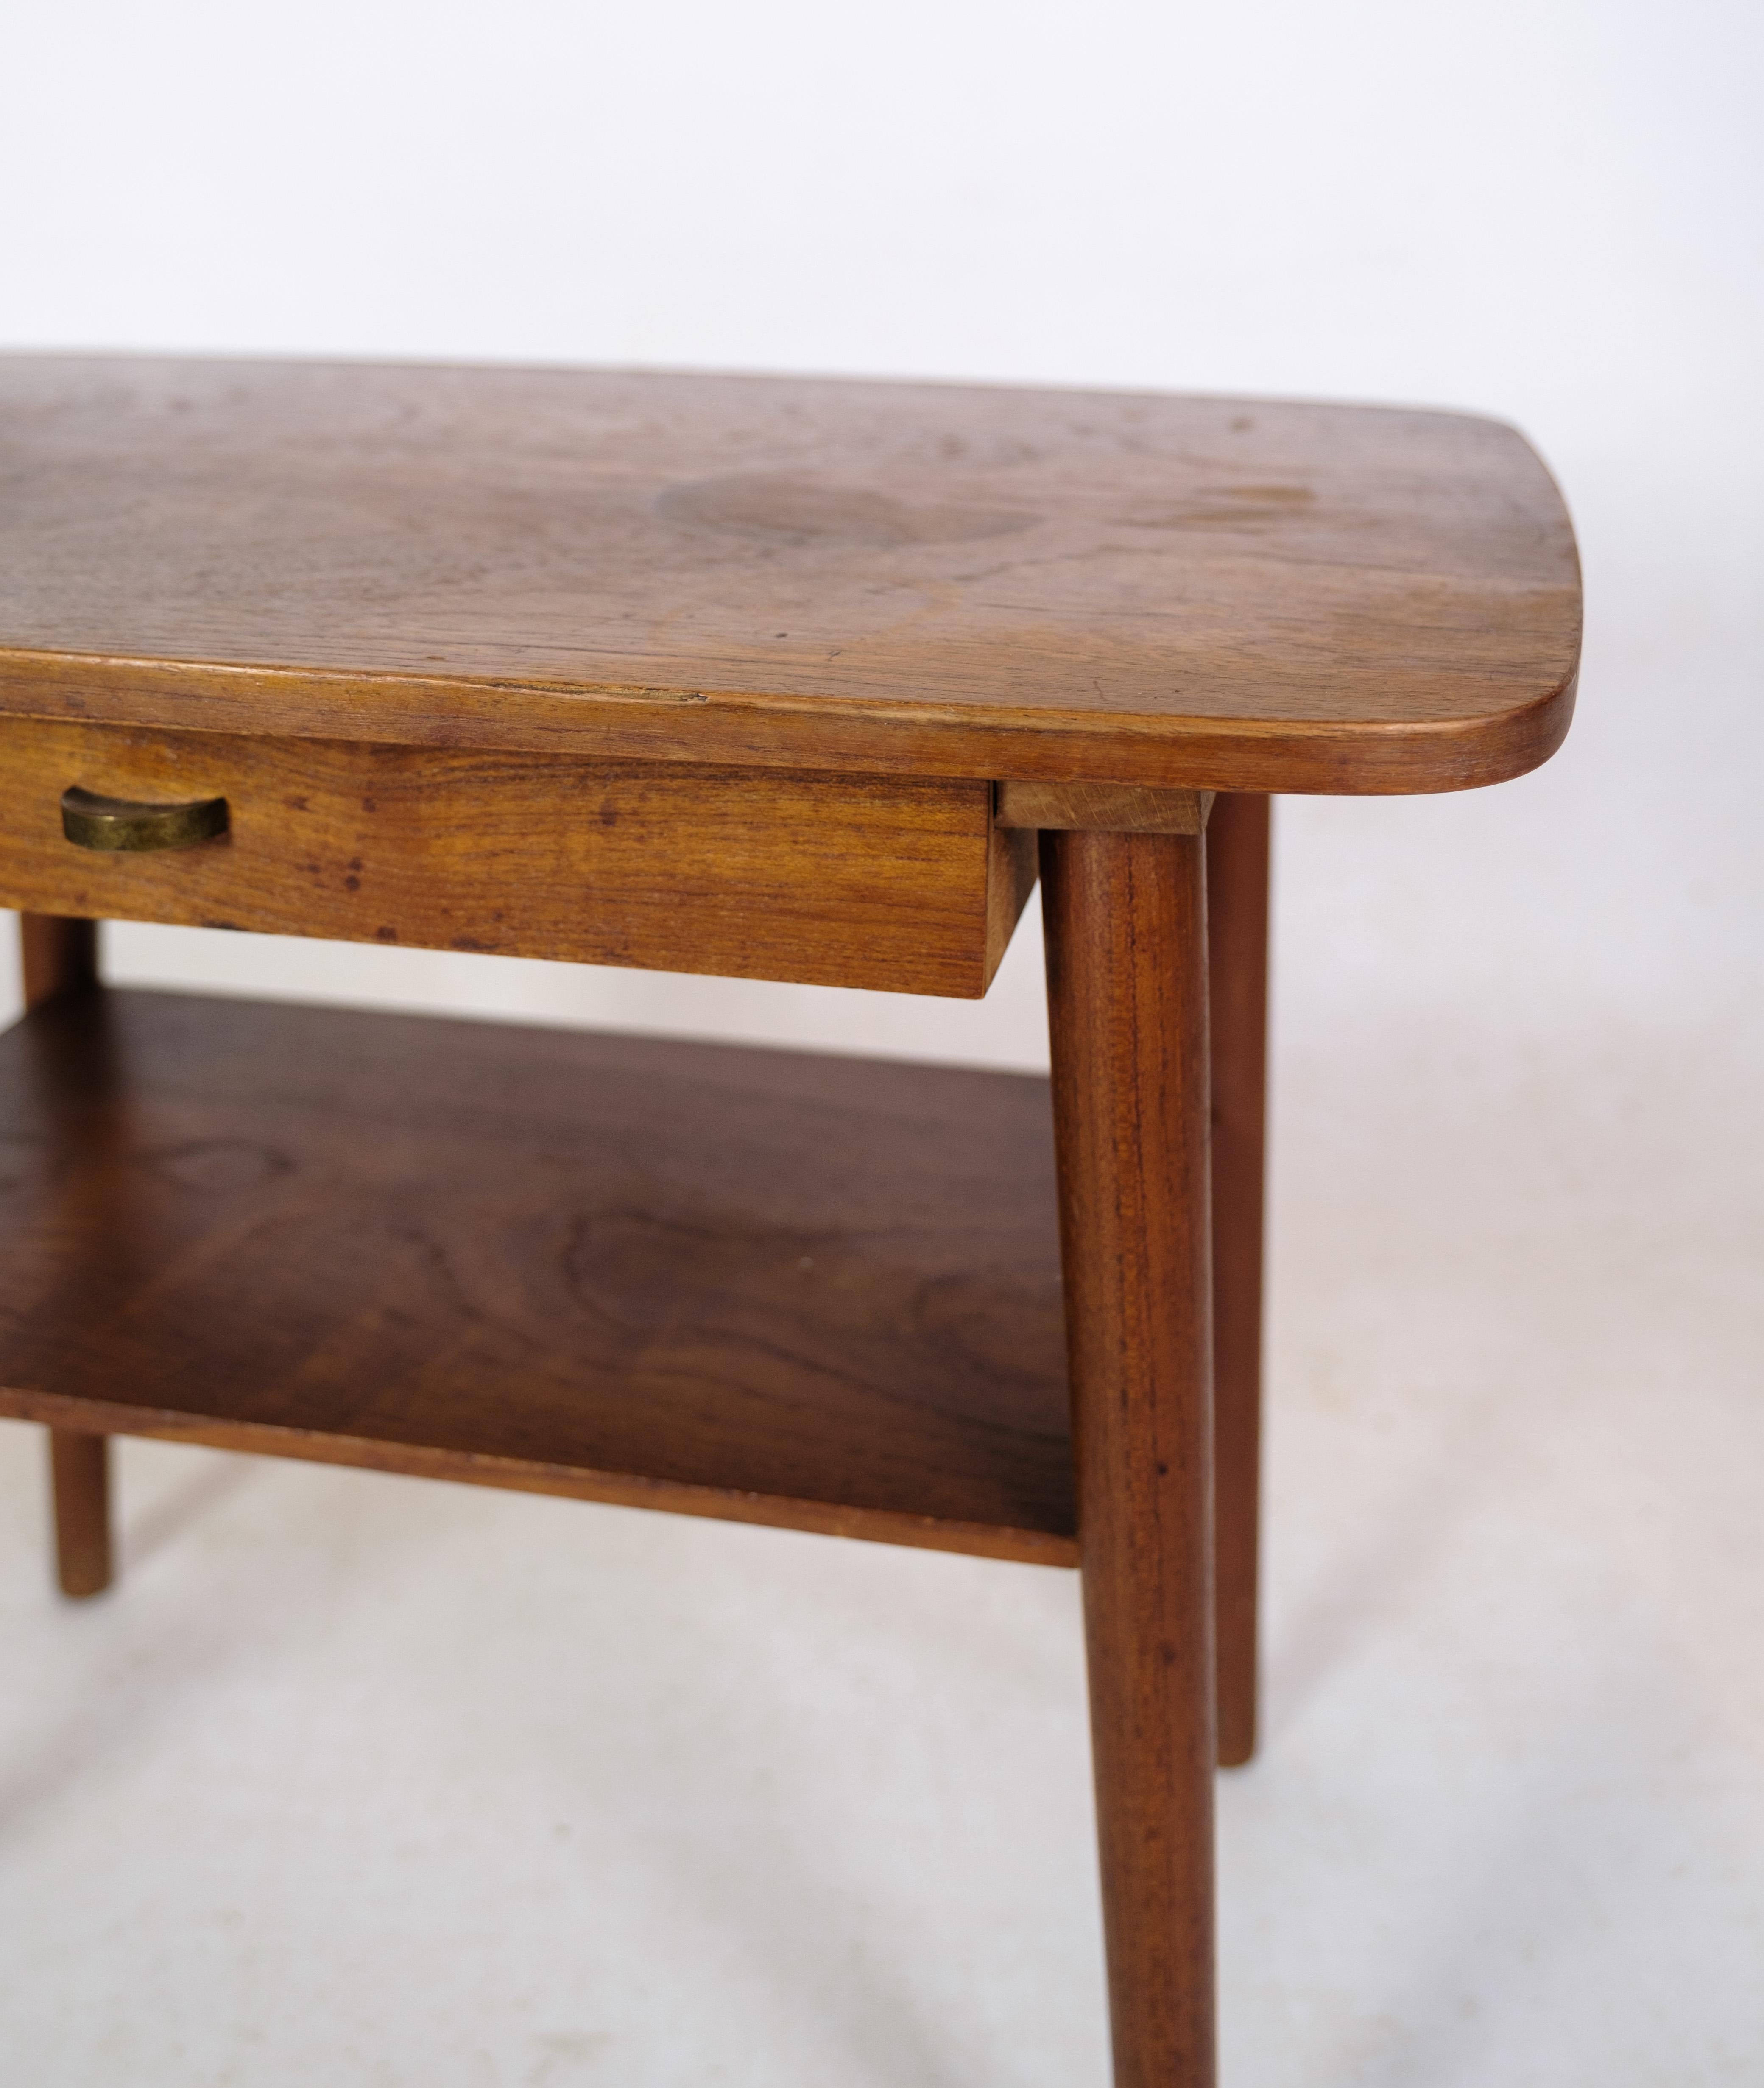 Side Table with Drawer and Shelf in Teak Wood of Danish Design from 1960's For Sale 3